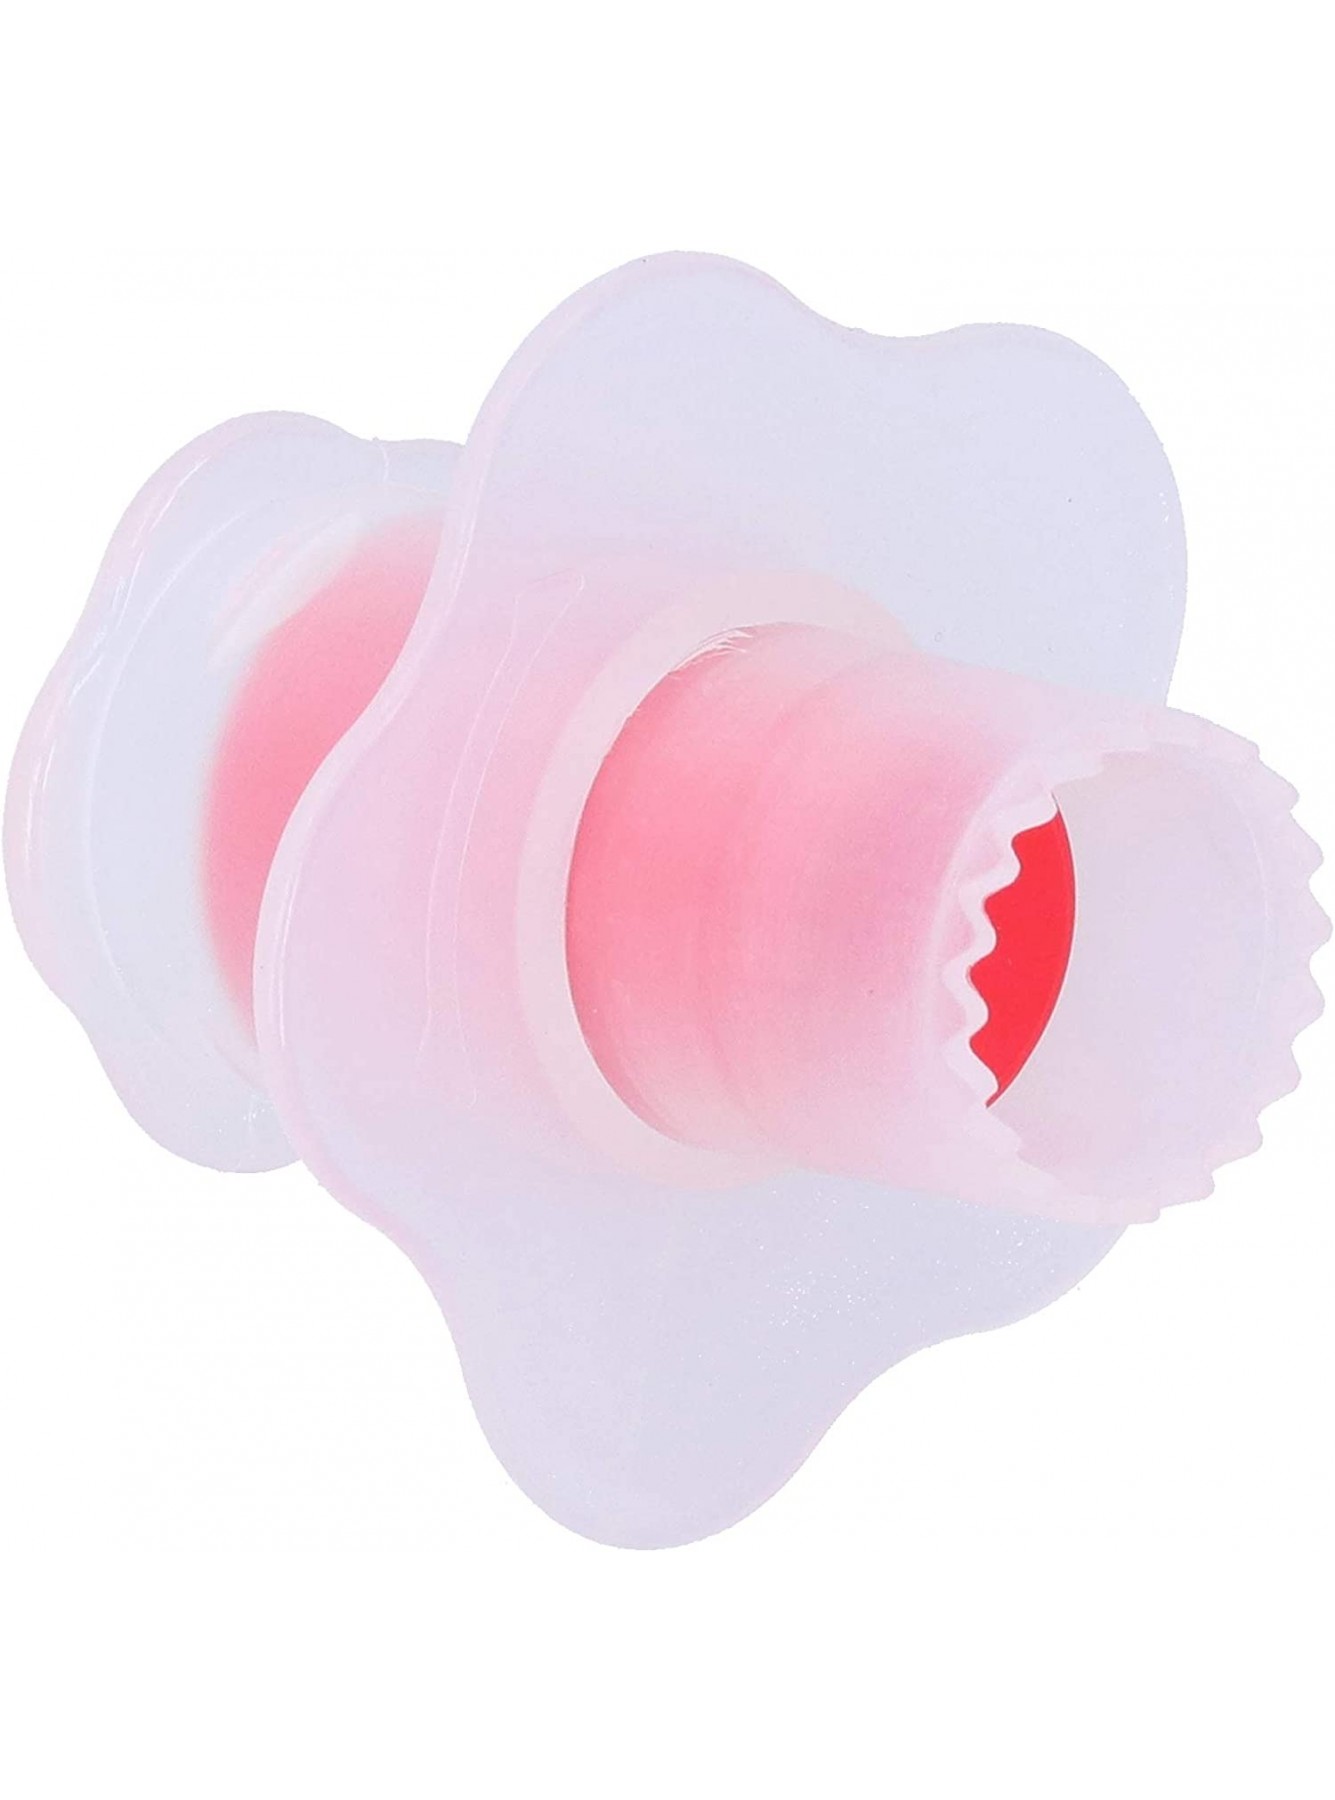 Cake Core Cream Filler Cupcake Plunger Easy To Clean Convenient To Use Baking for Cake B09L7C8DL8